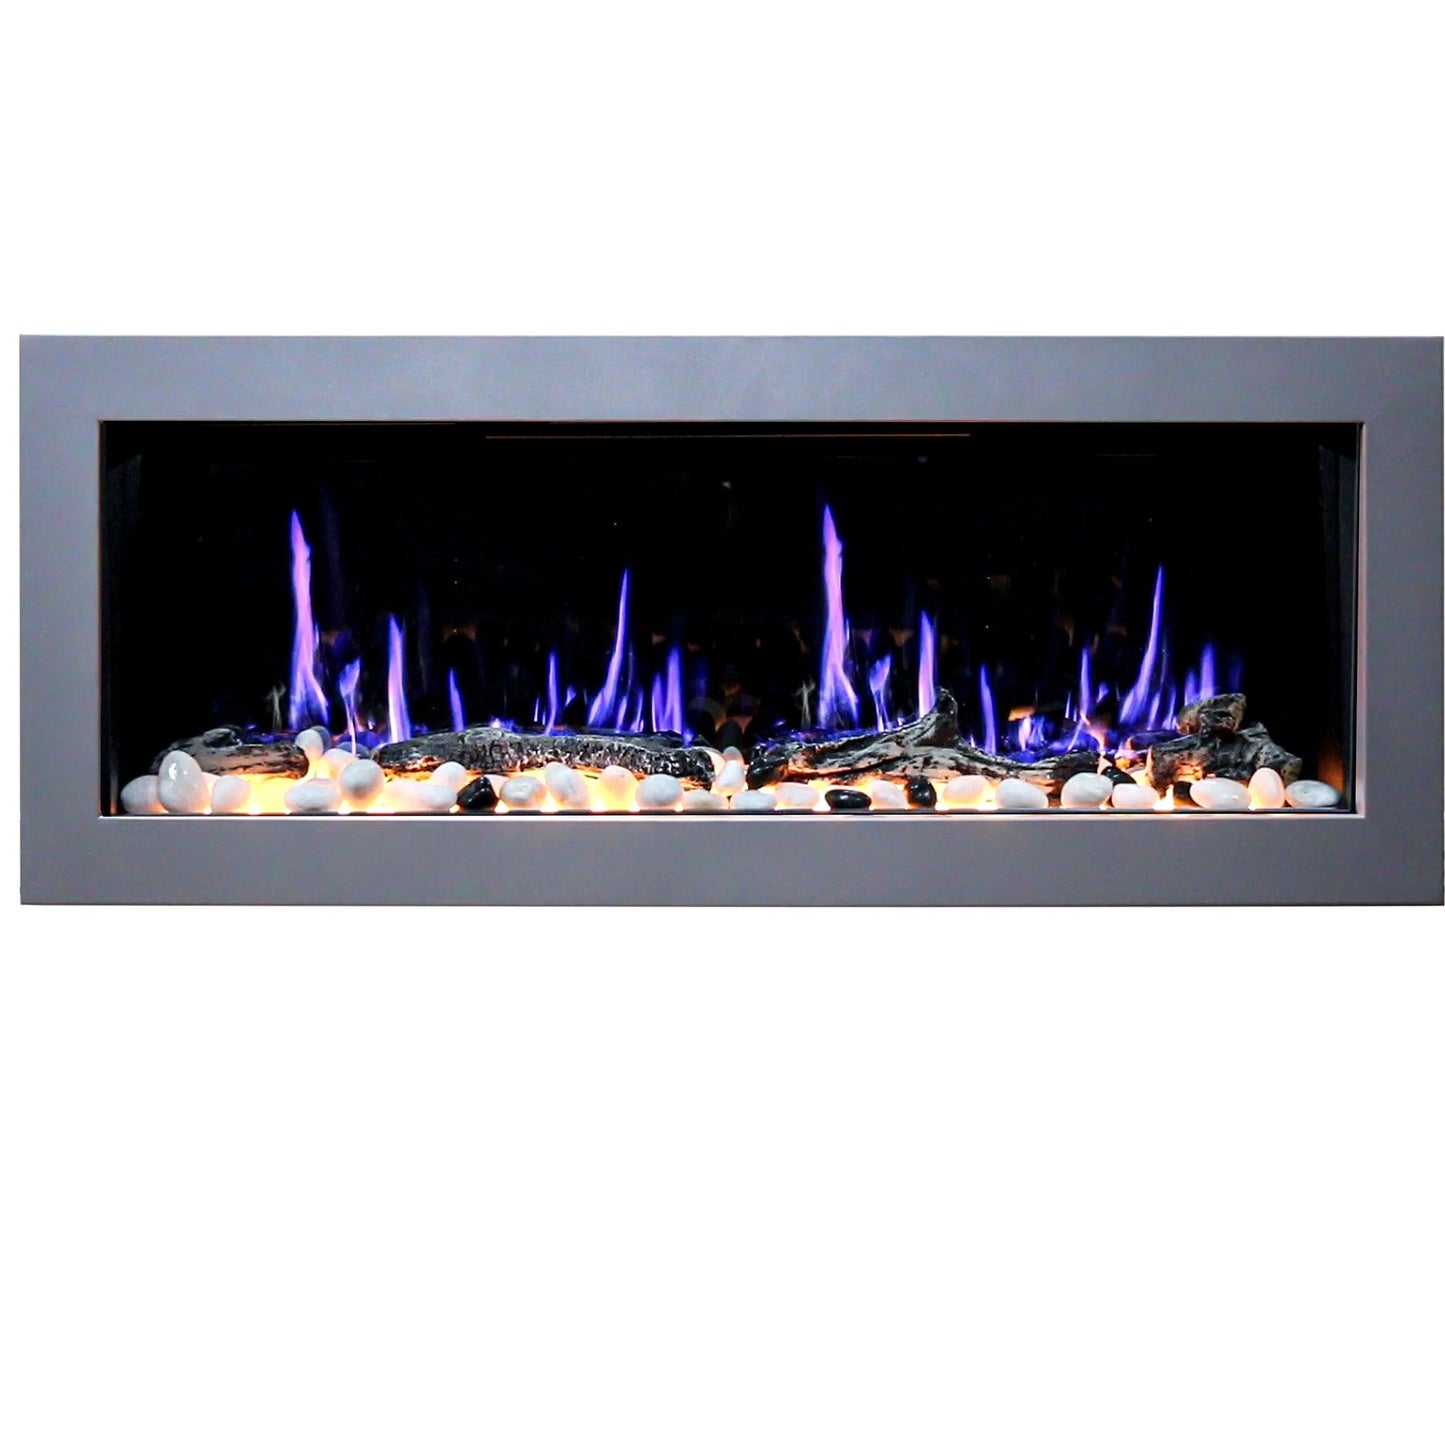 ZopaFlame™ 47" Linear Wall-mount Electric Fireplace - SP17488X - ZopaFlame Fireplaces